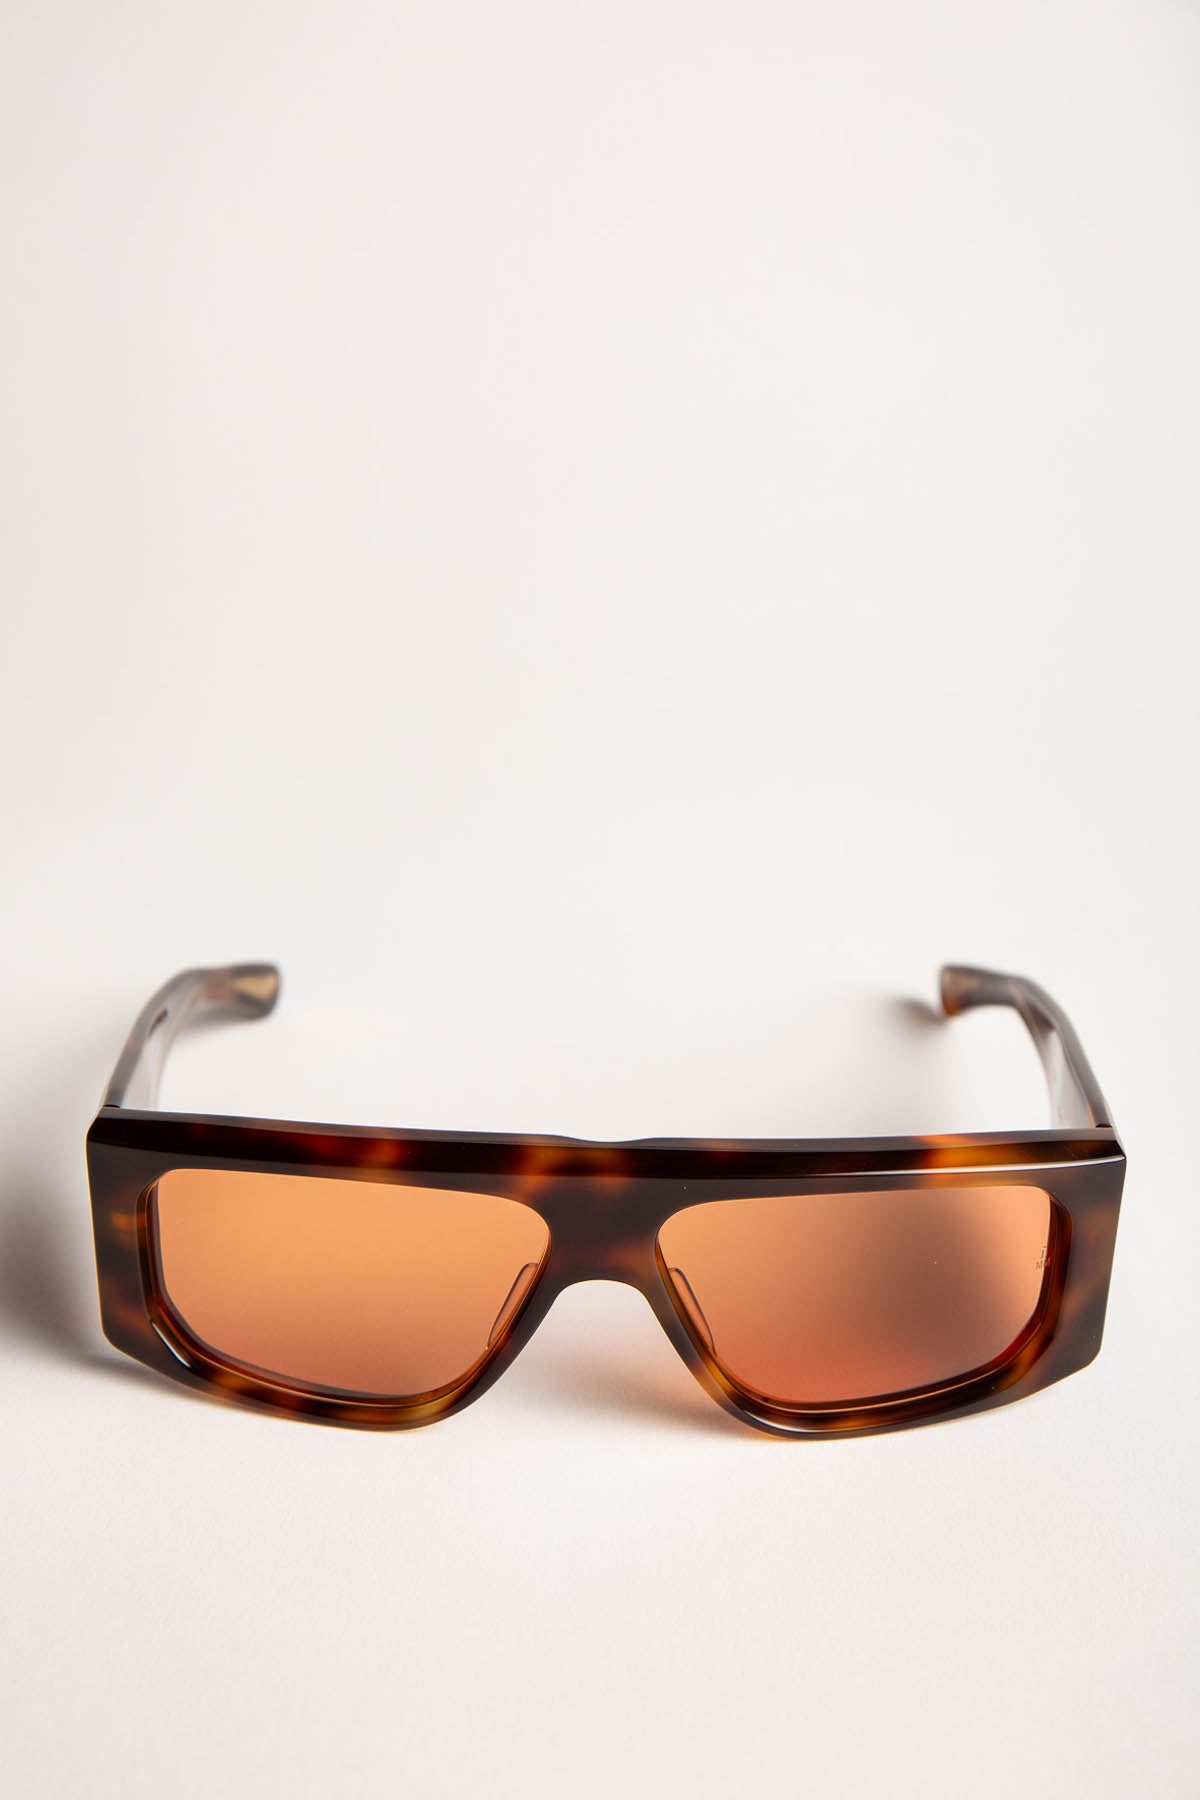 JACQUES MARIE MAGE | CLIFF SUNGLASSES